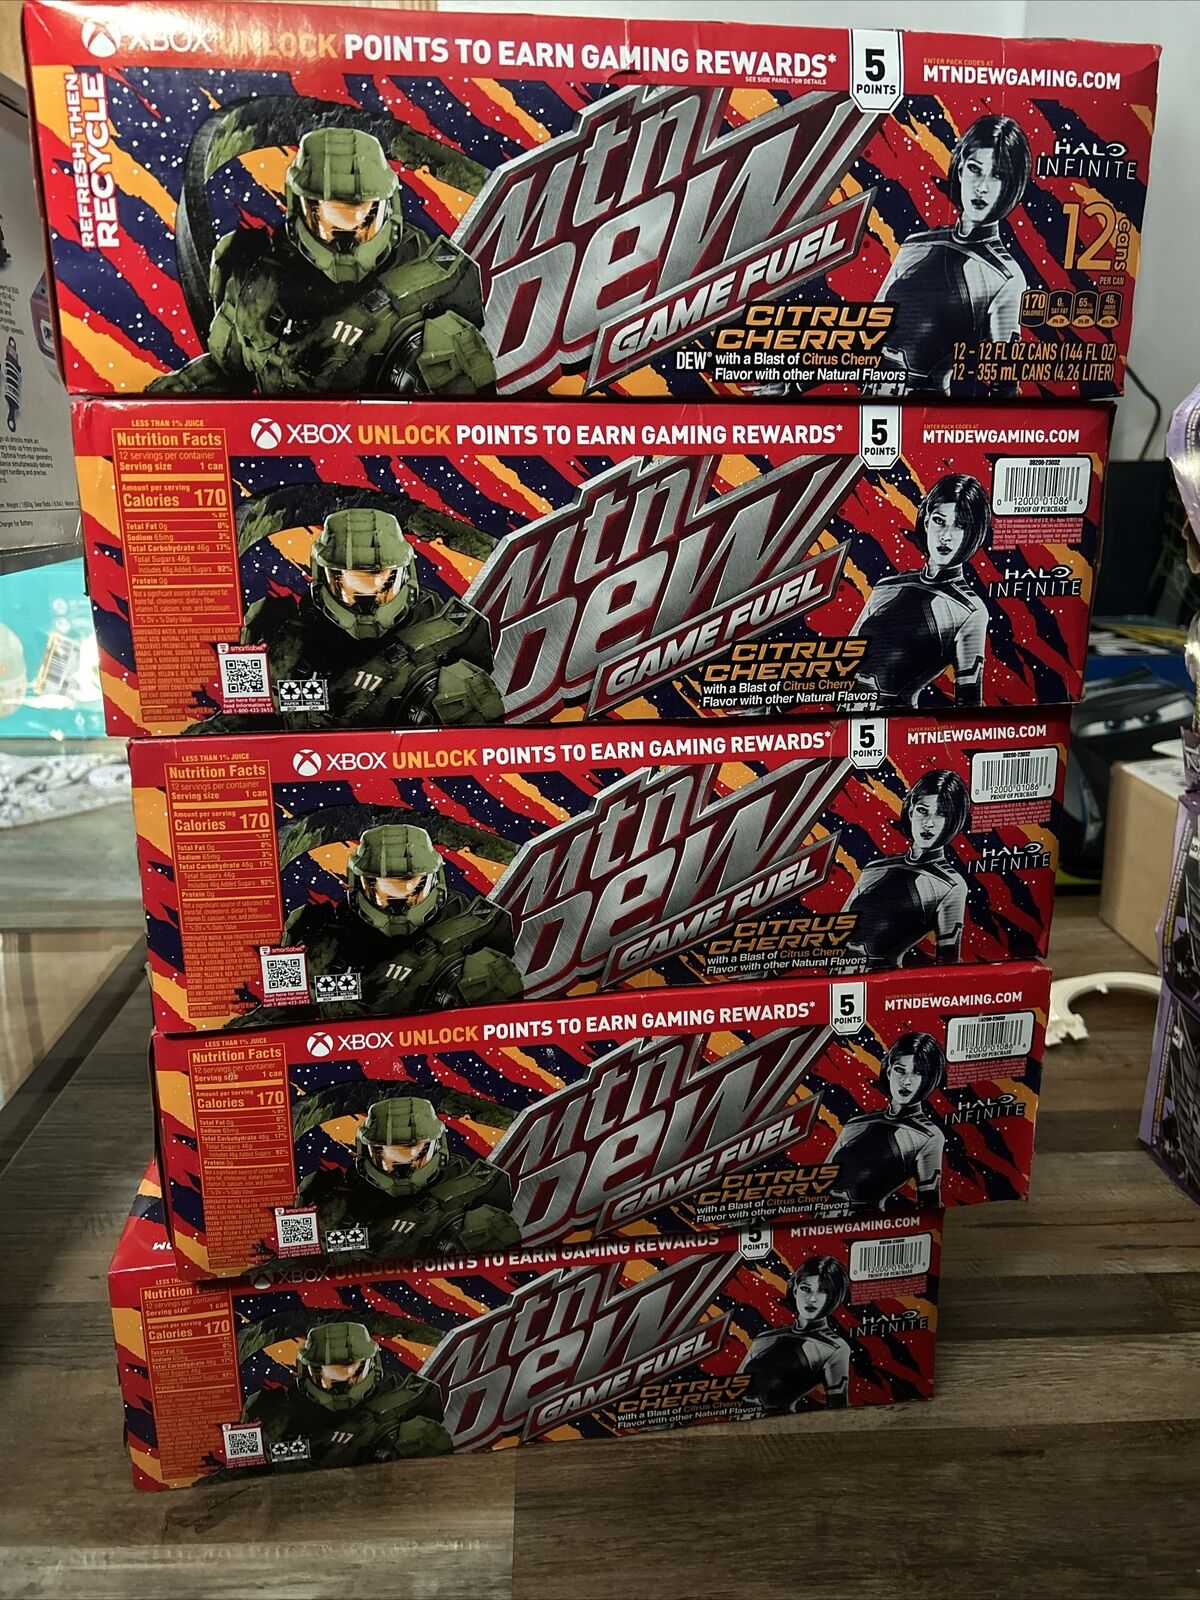 Mountain Dew Citrus Cherry Game Fuel - Limited 12 Cans Case Halo Infinite - NEW